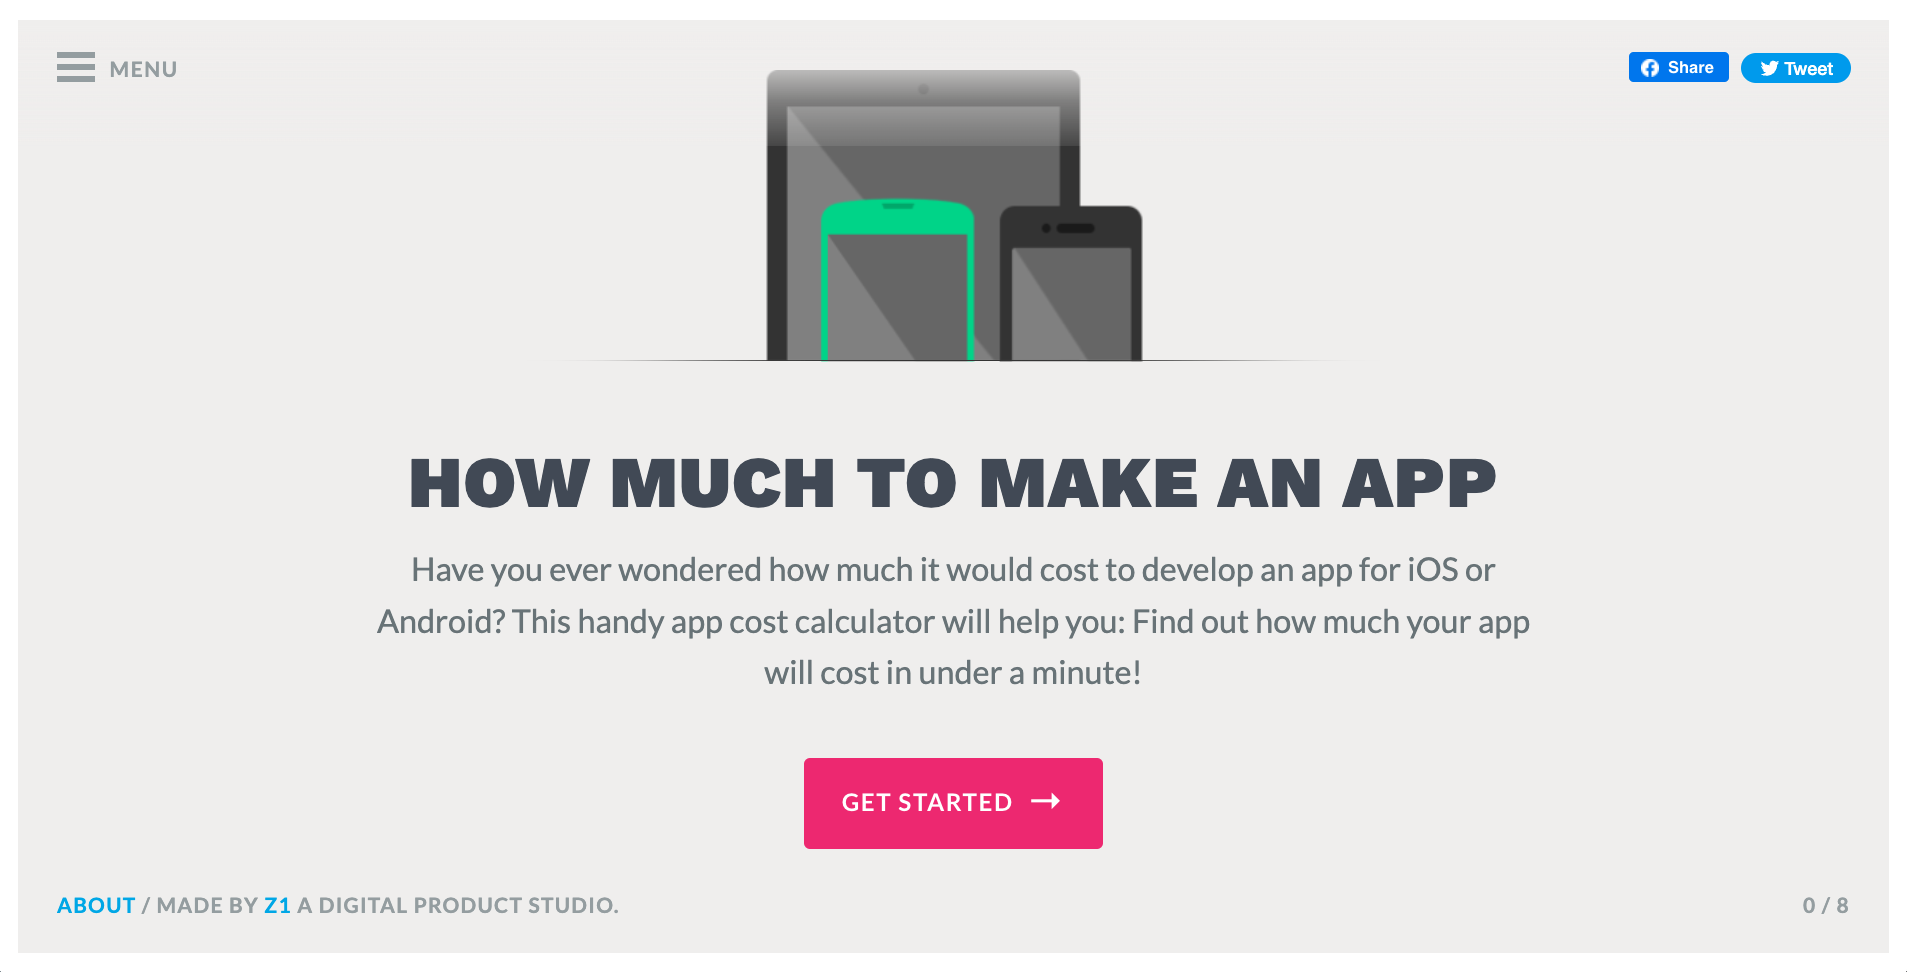 How much to make an app banner